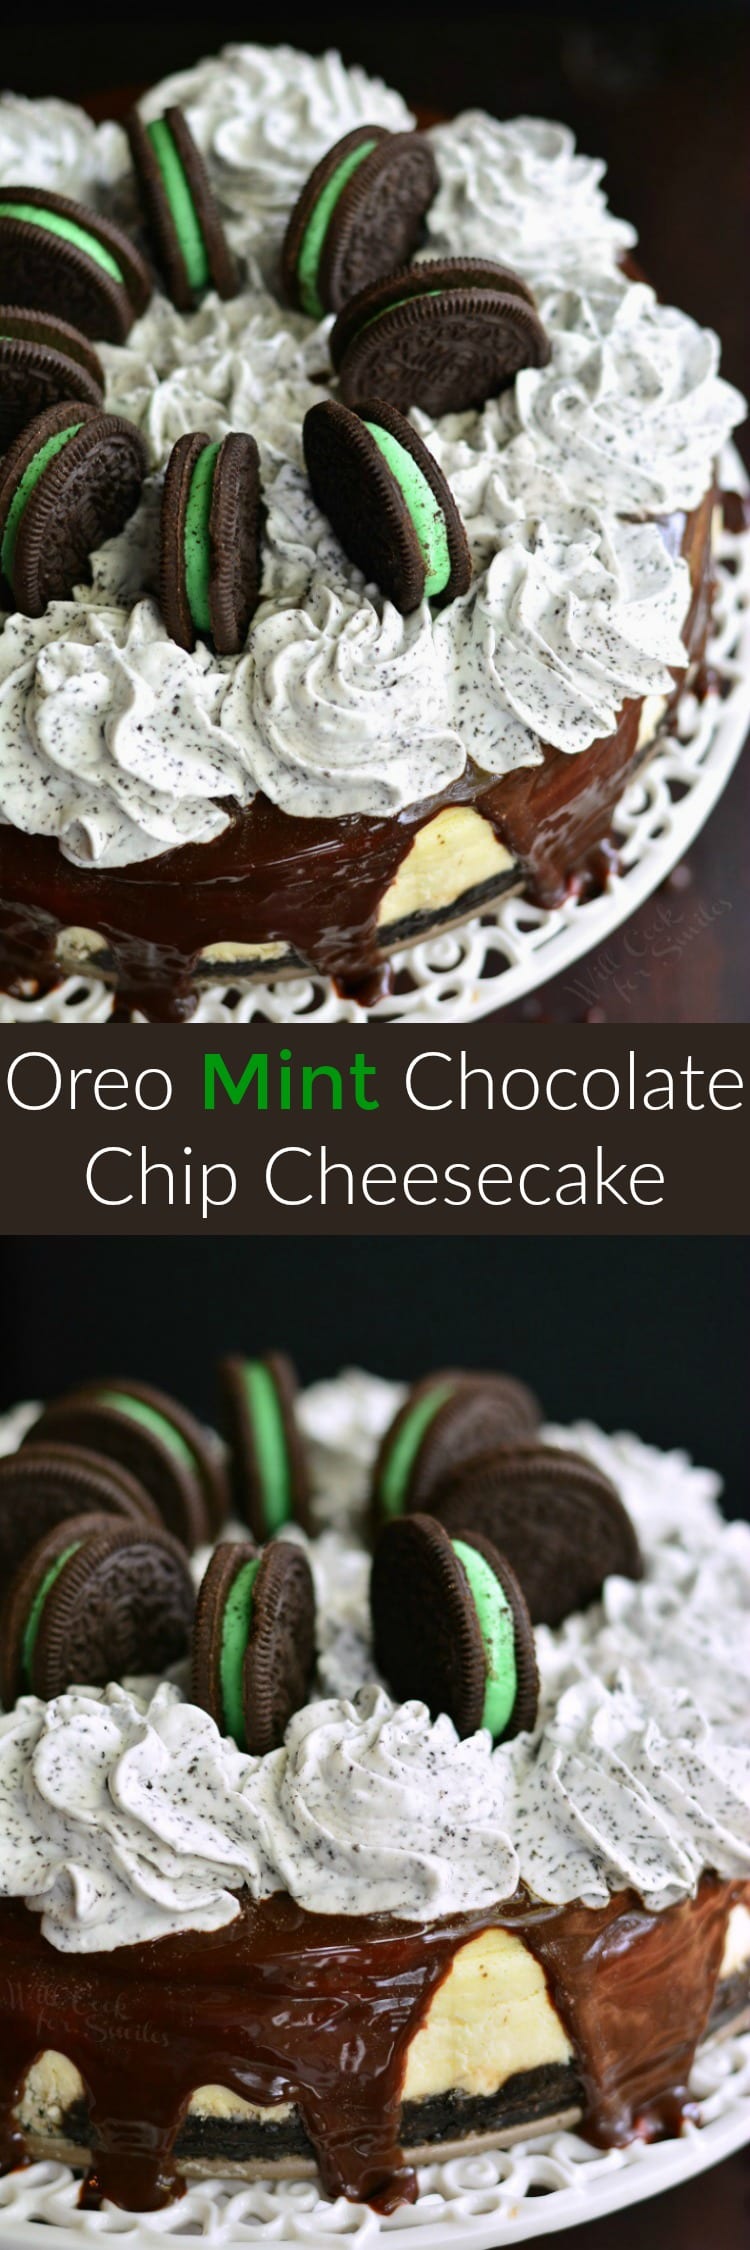 Oreo Mint Chocolate Chip Cheesecake on a cake pan collage 